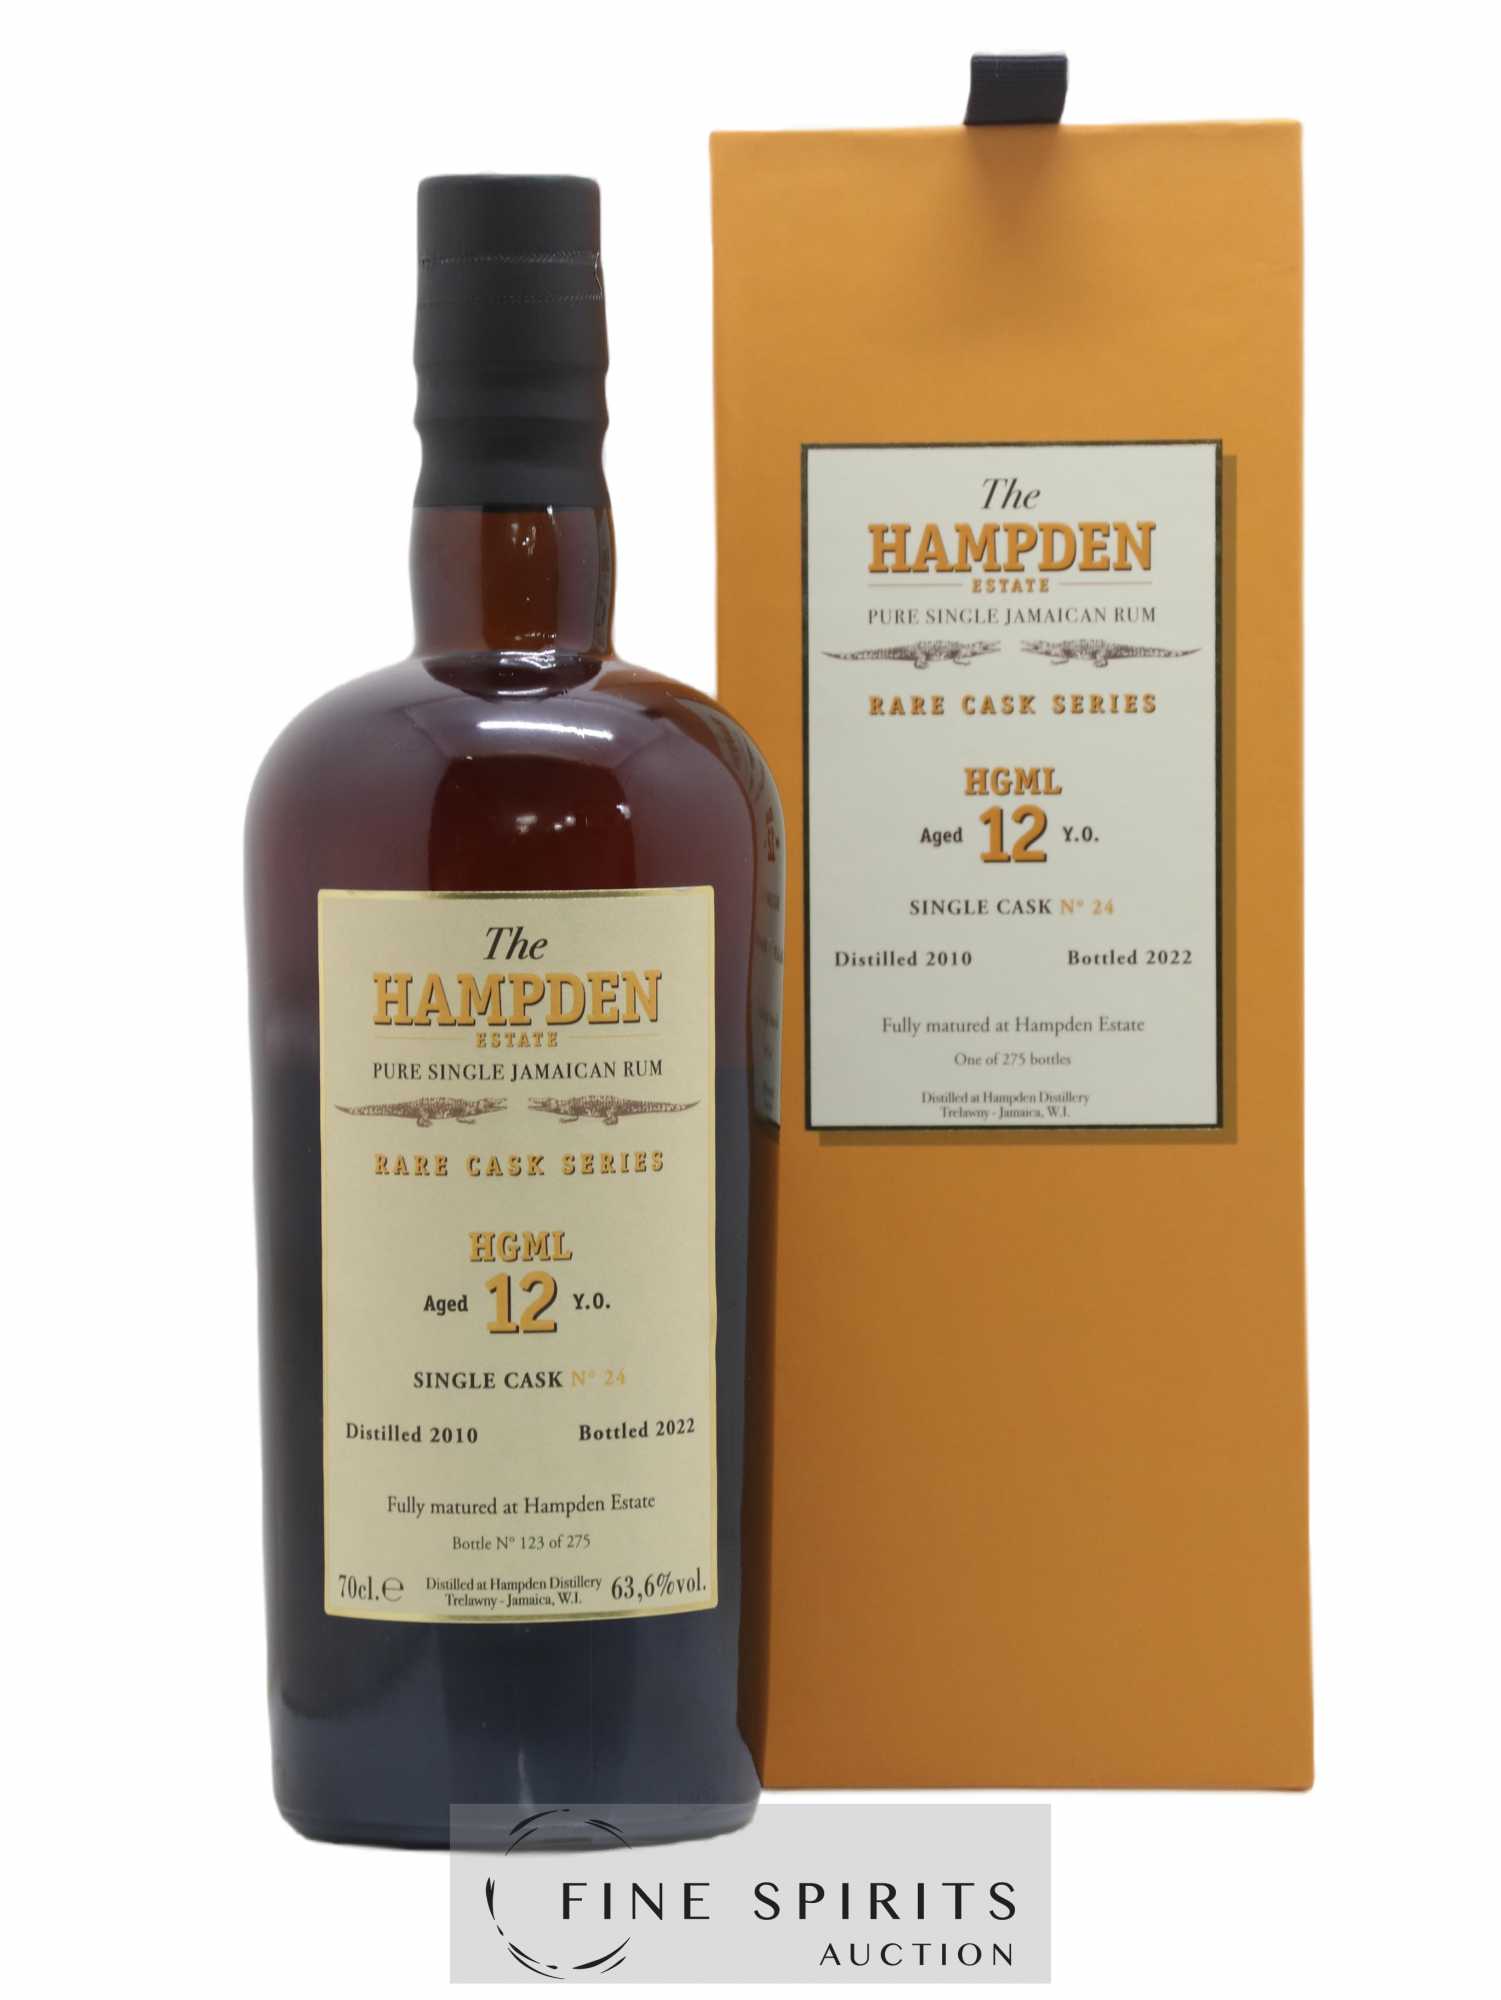 Hampden 12 years 2010 Of. HGML Single Cask n°24 - One of 275 - bottled 2022 Rare Cask Series 